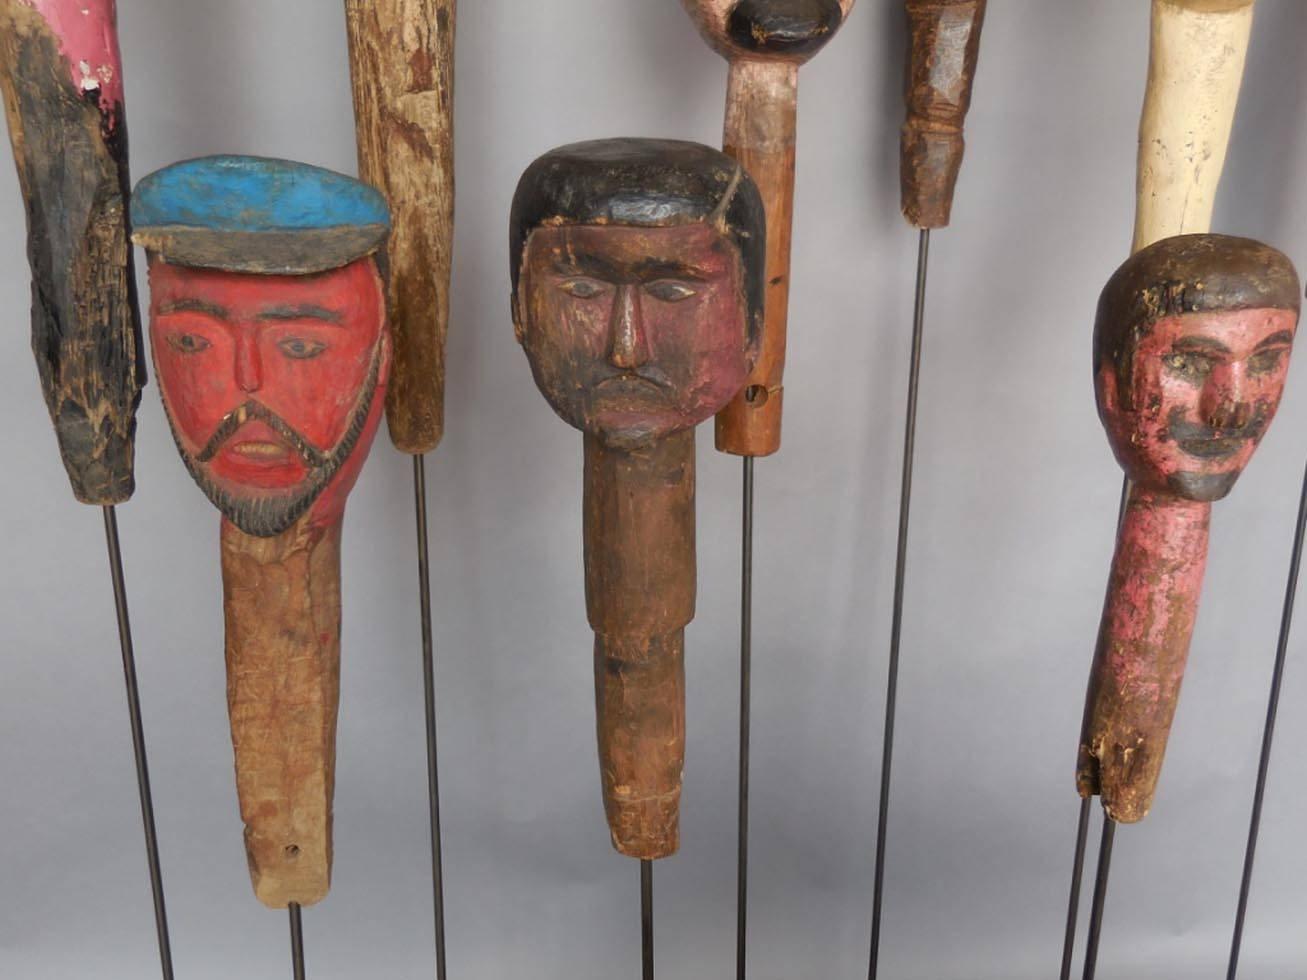 Collection of antique Gigantes (giant) heads from Guatemala. Carved wood heads held by indigenous people on stilts, dressed in long robes to depict giants in ceremonial processions. Priced and sold separately, but look great as a grouping.
Ranging